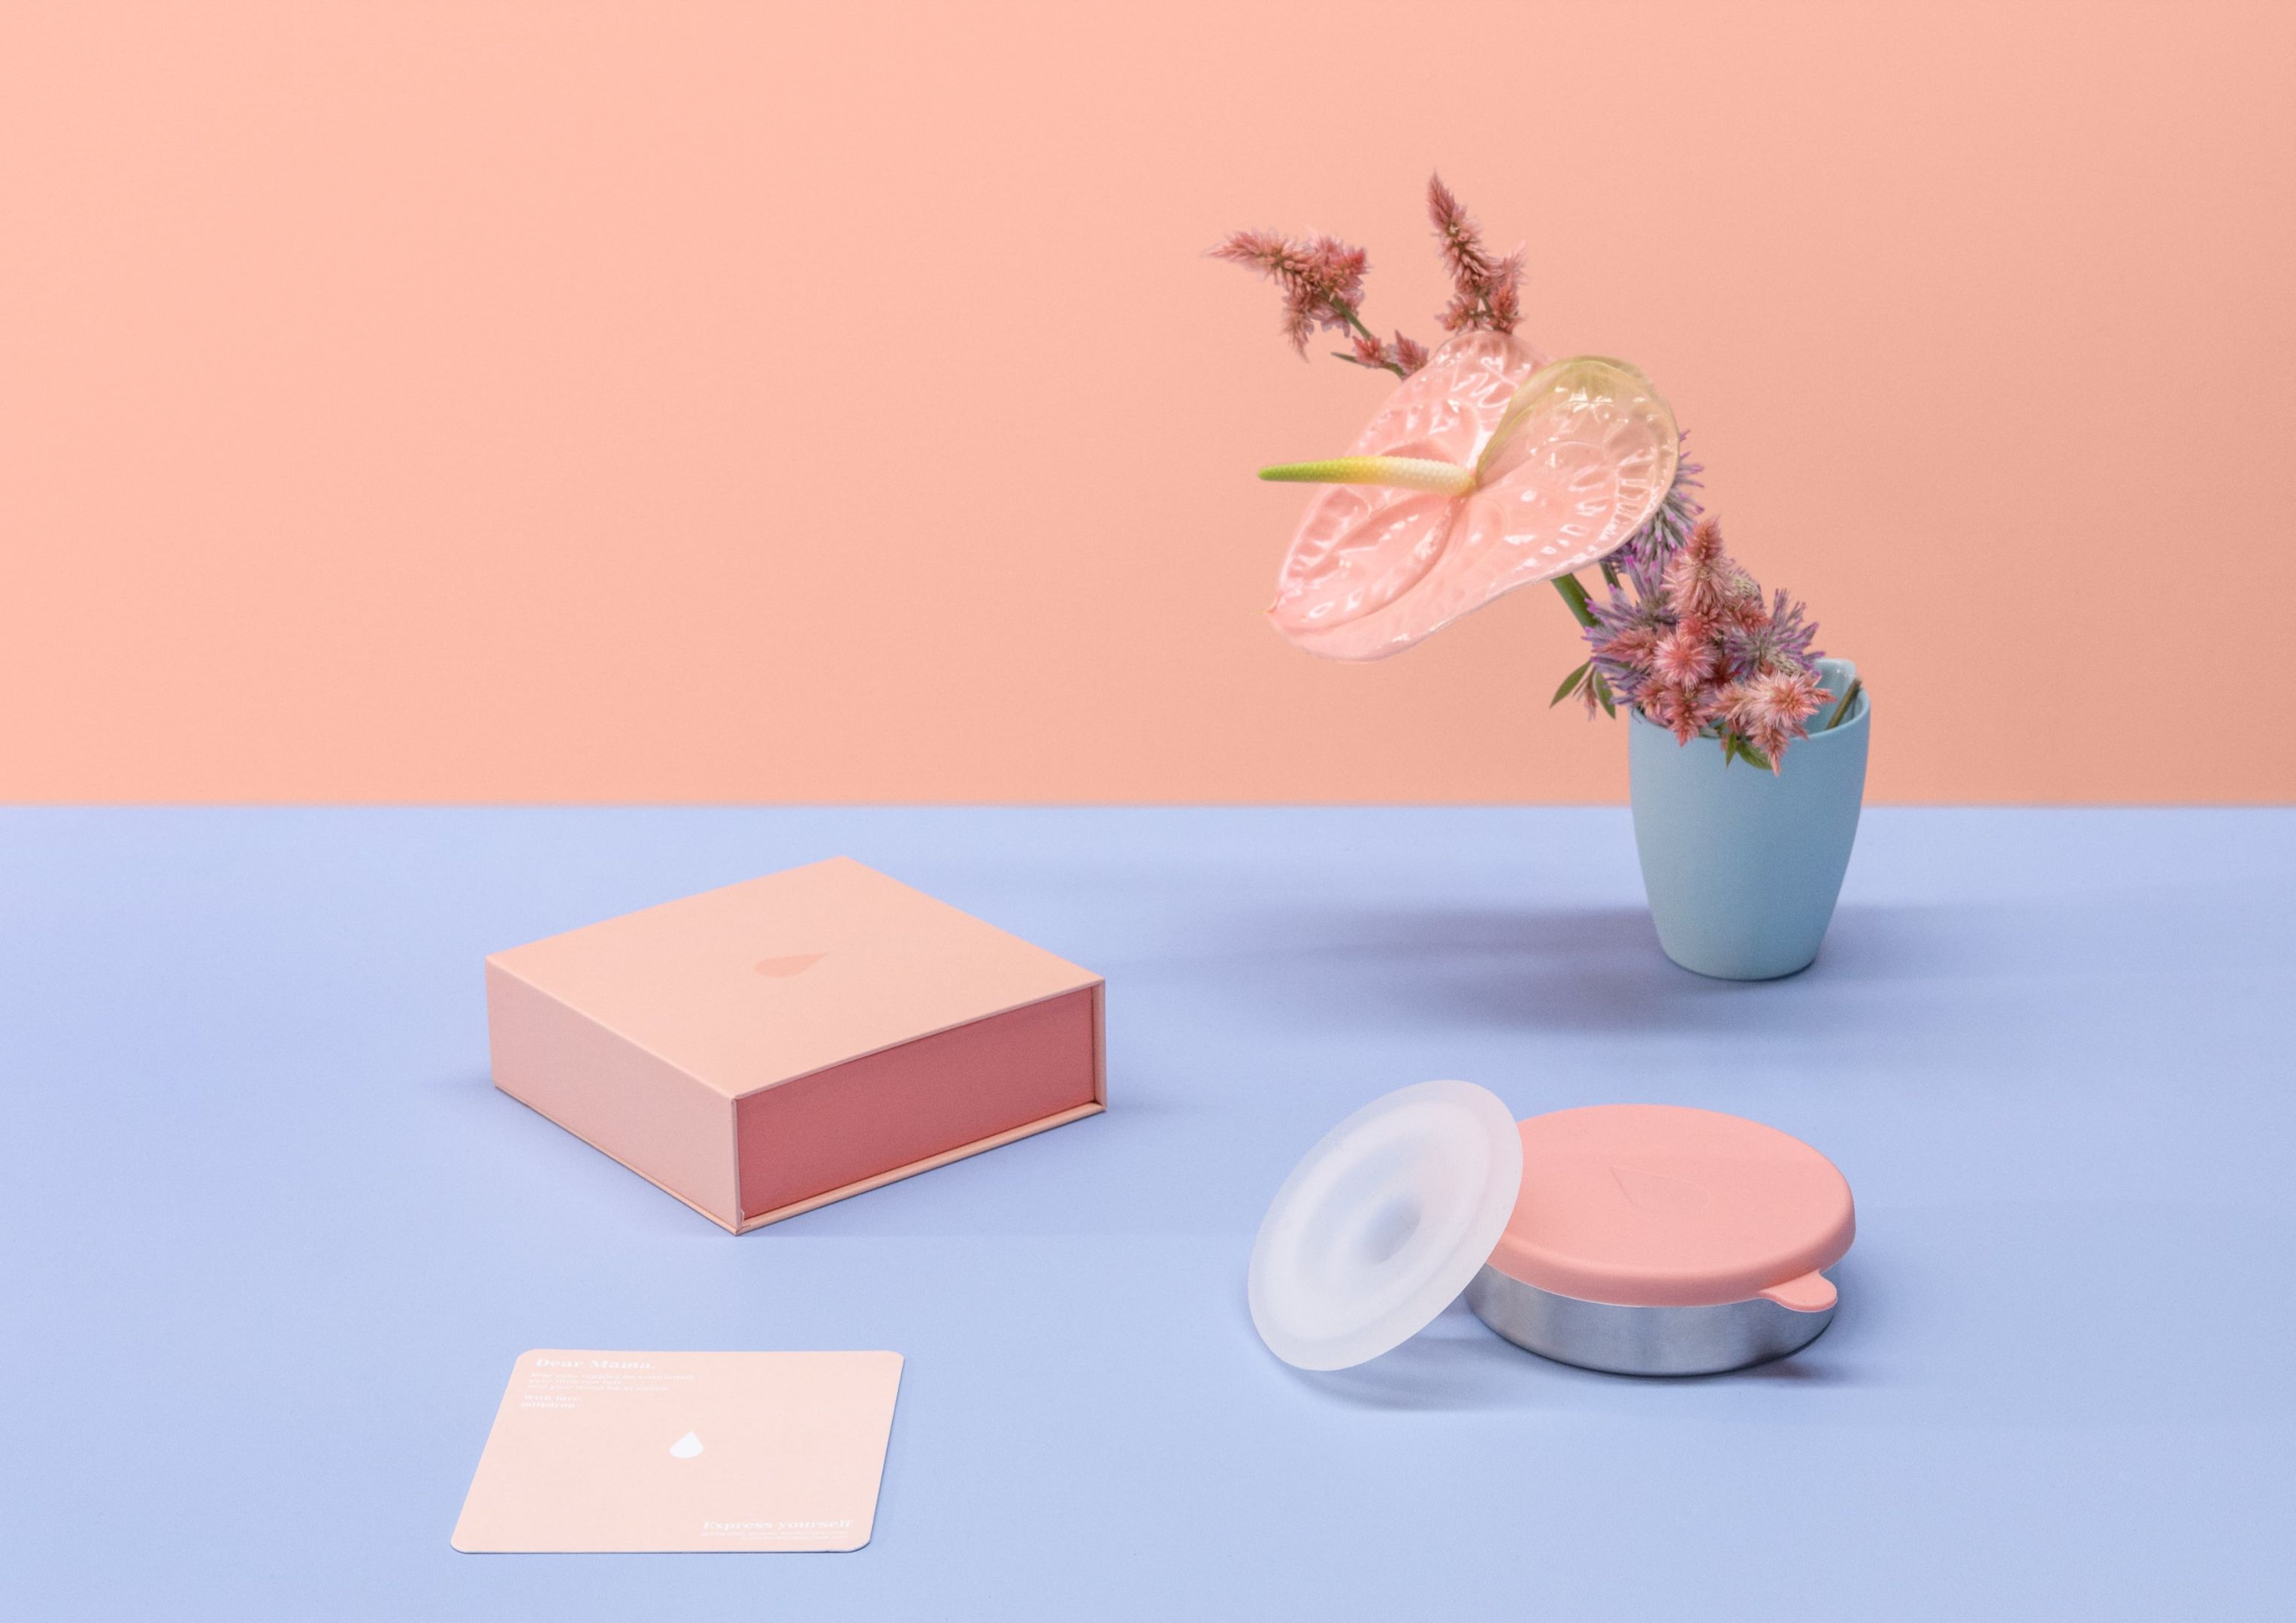 A product shot of Milkdrop, a soft circle shaped silicone cushion, on a pastel blue table with a vase of flowers, showcasing its apricot packaging.  